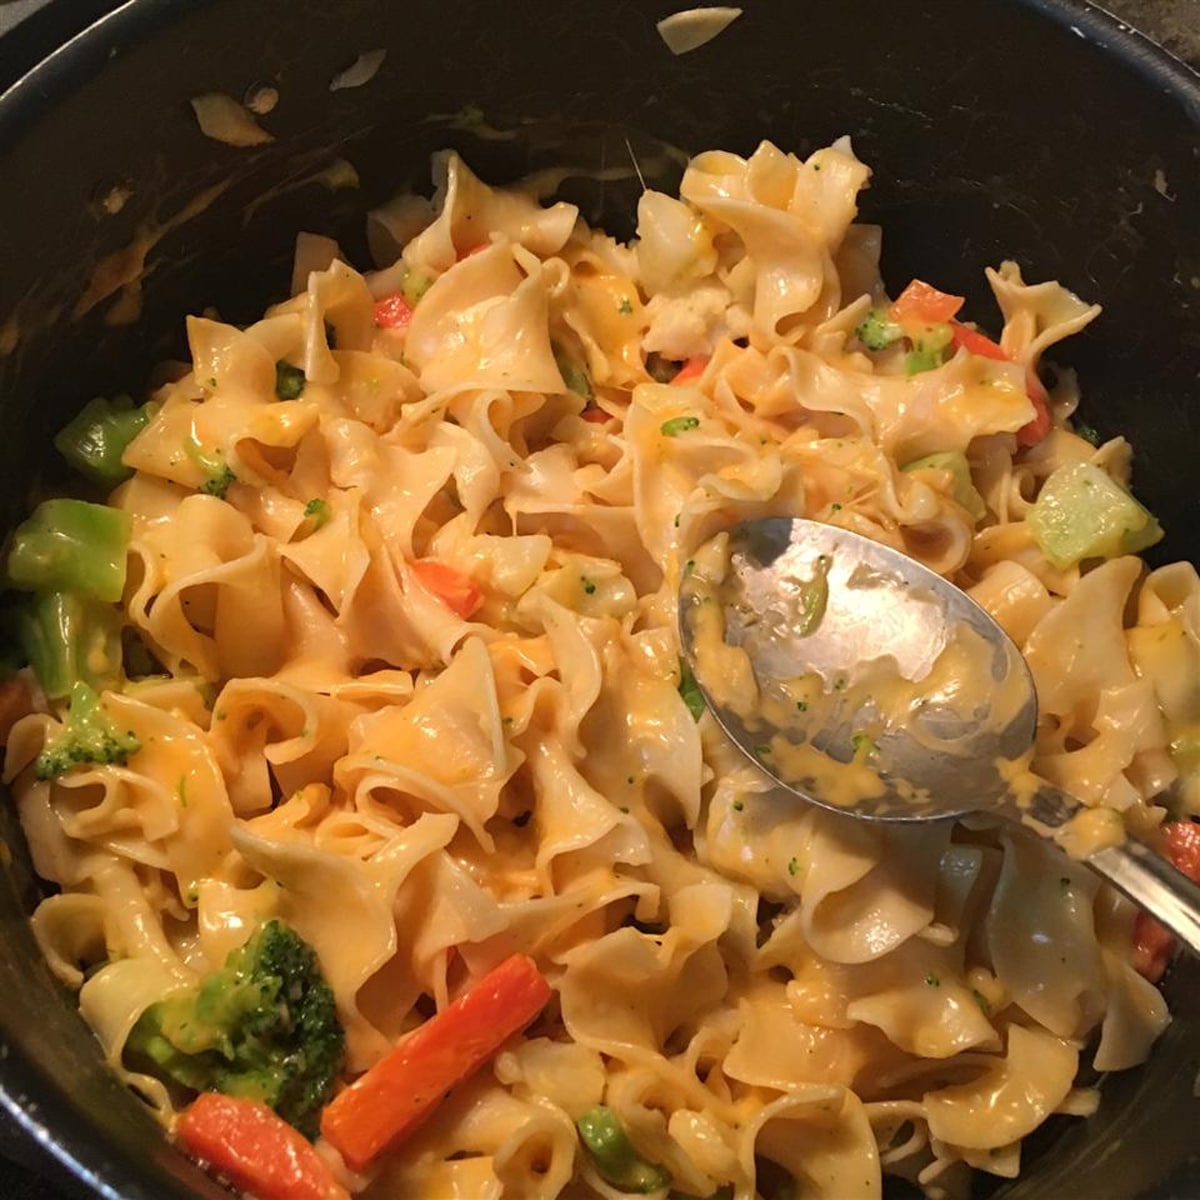 Cheesy vegetables and noodles